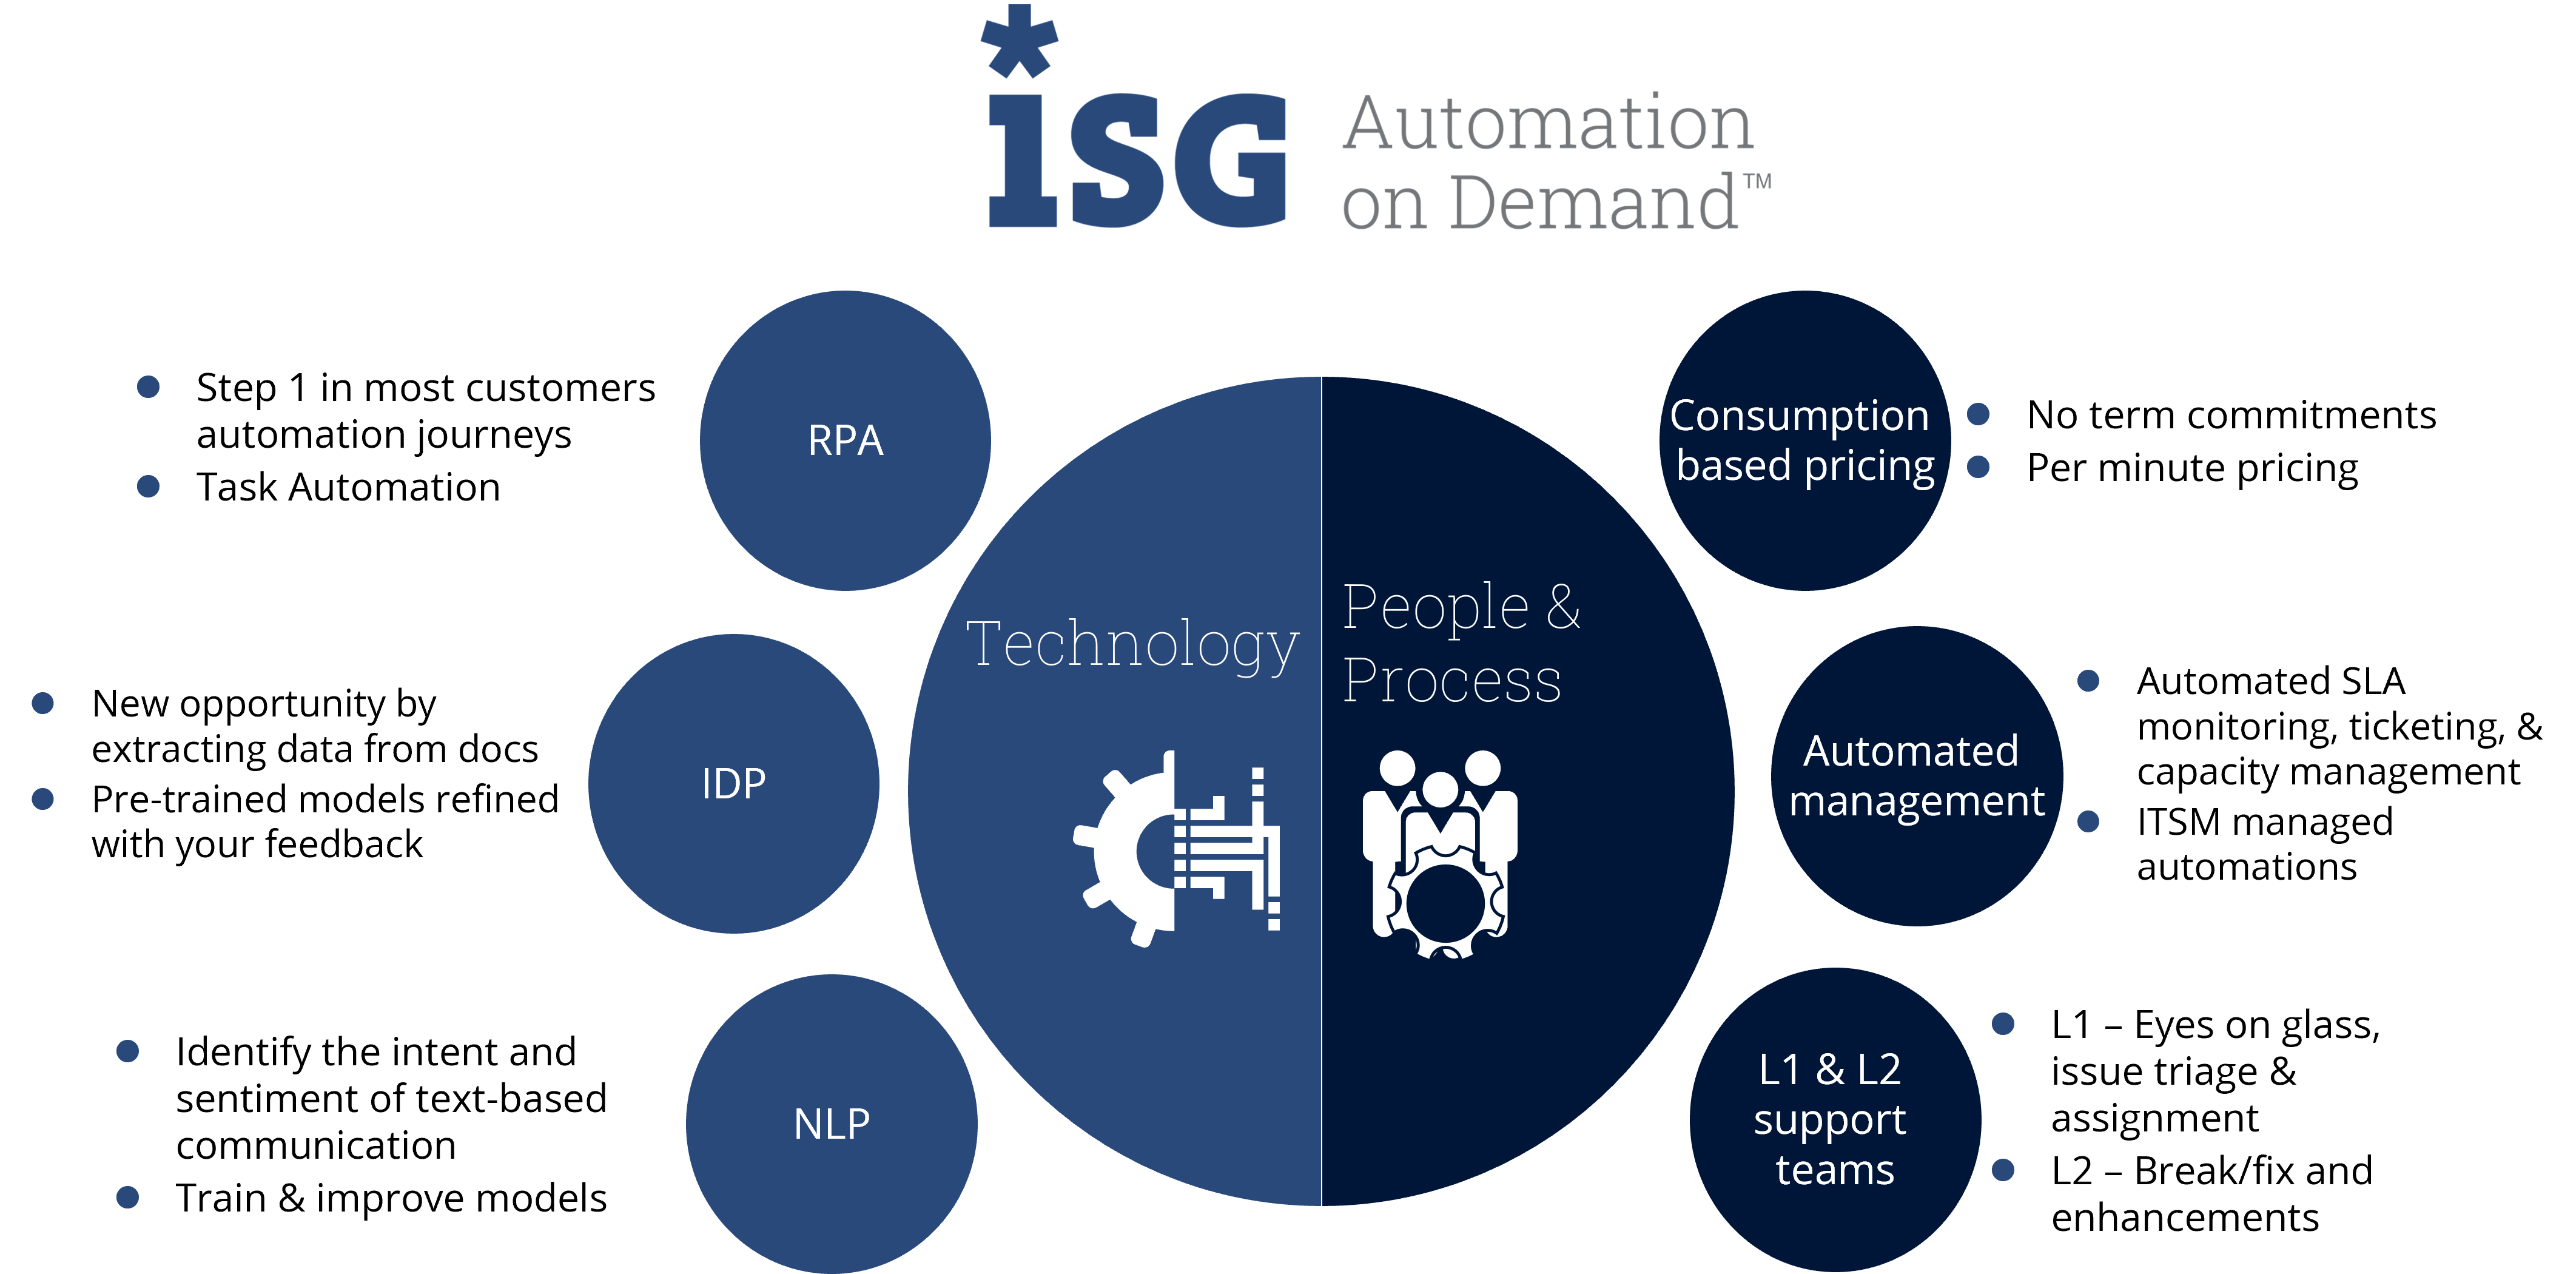 automation on demand technology and people and processes